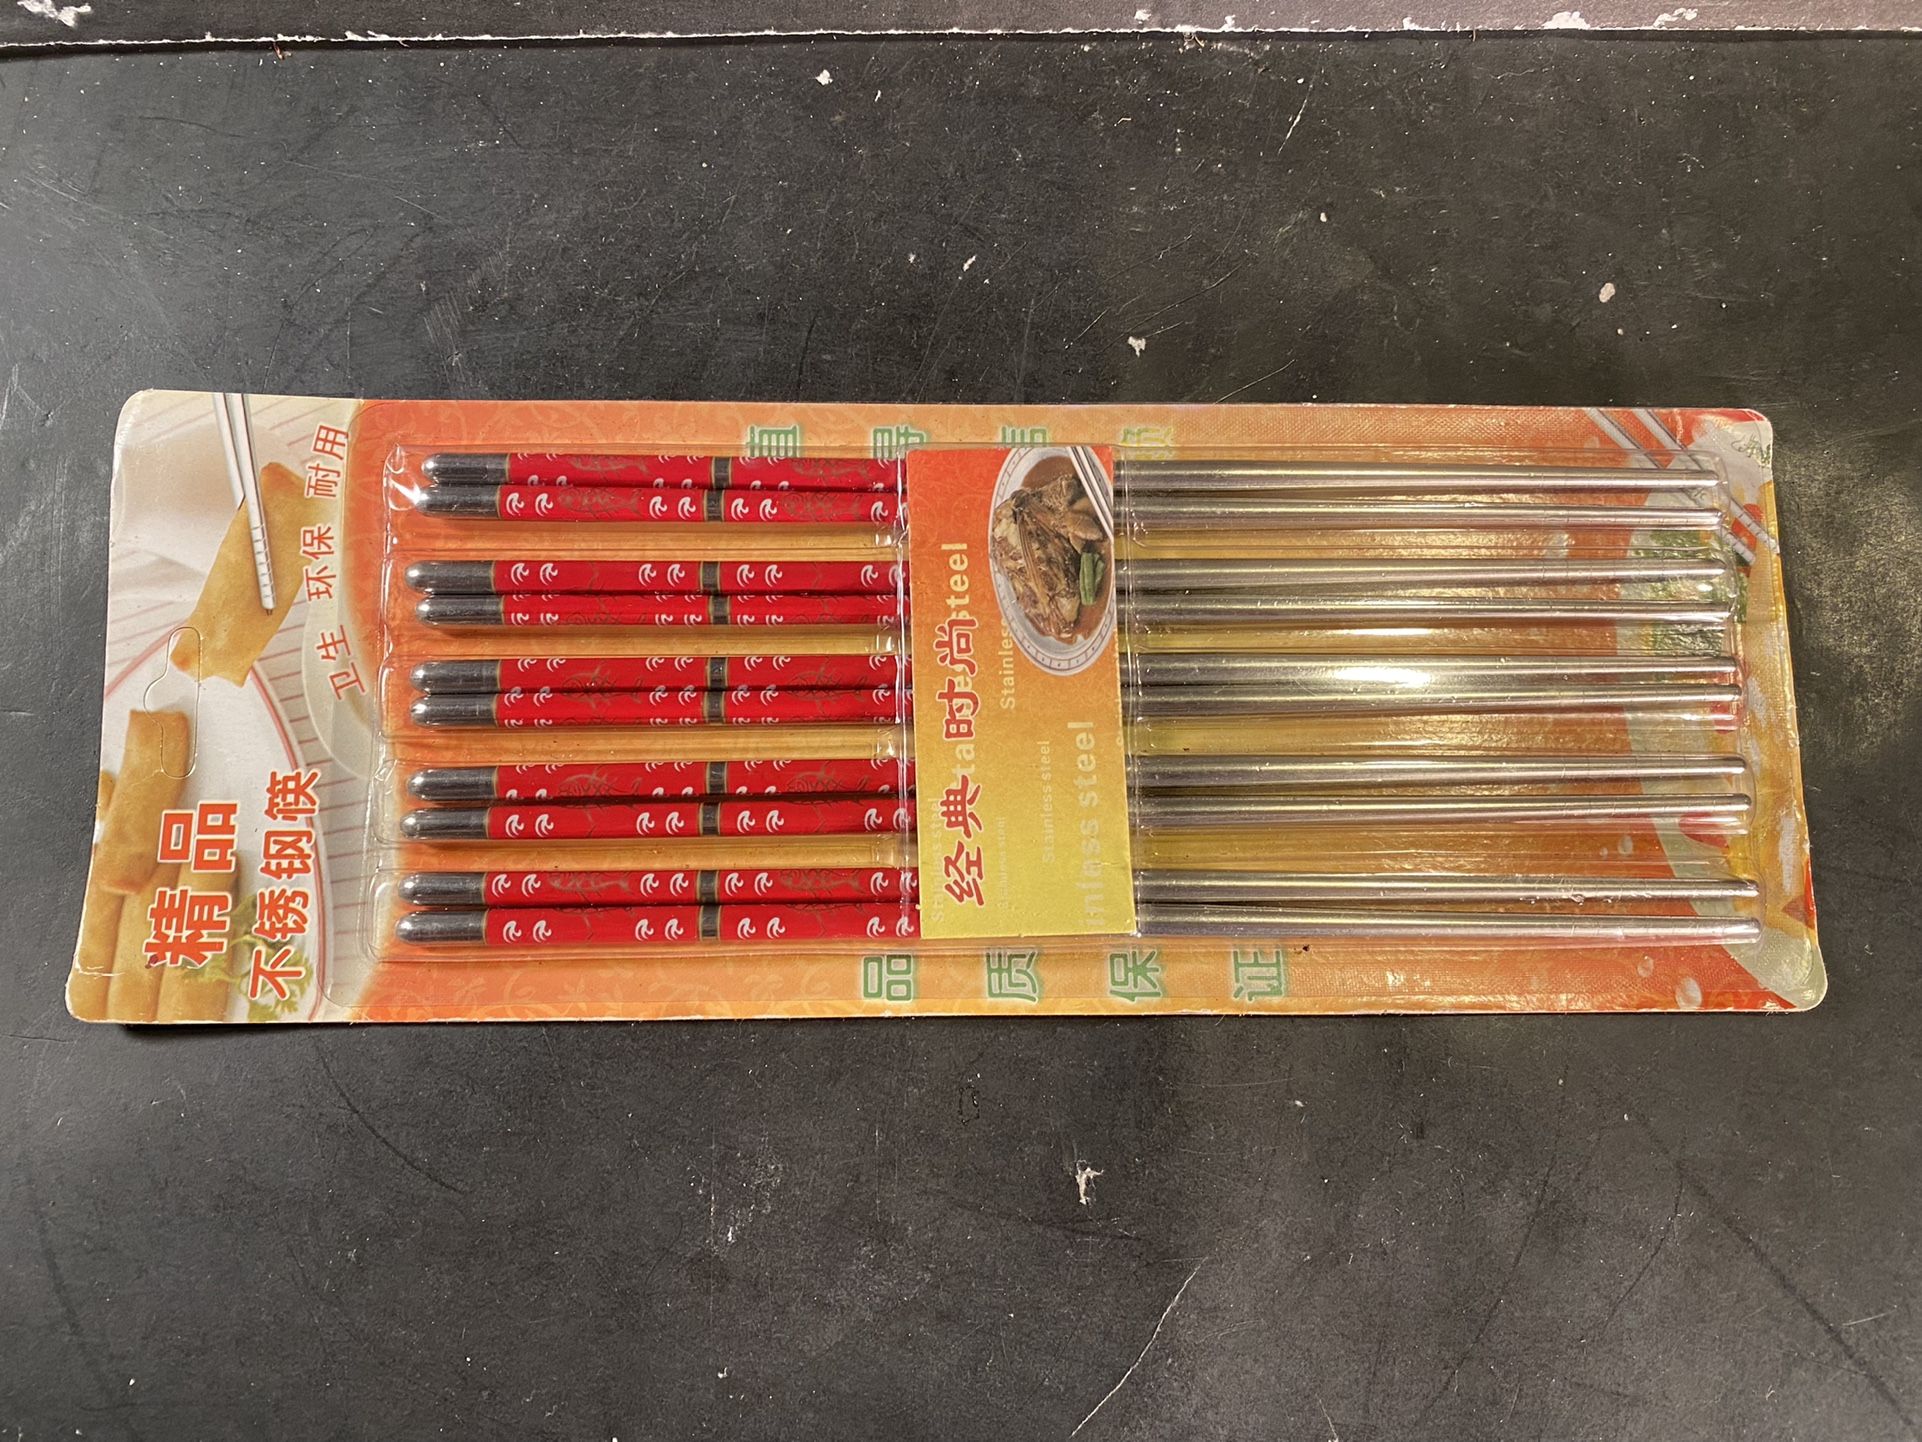 Chinese Reusable Stainless-Steel Chopsticks (5 Pairs)